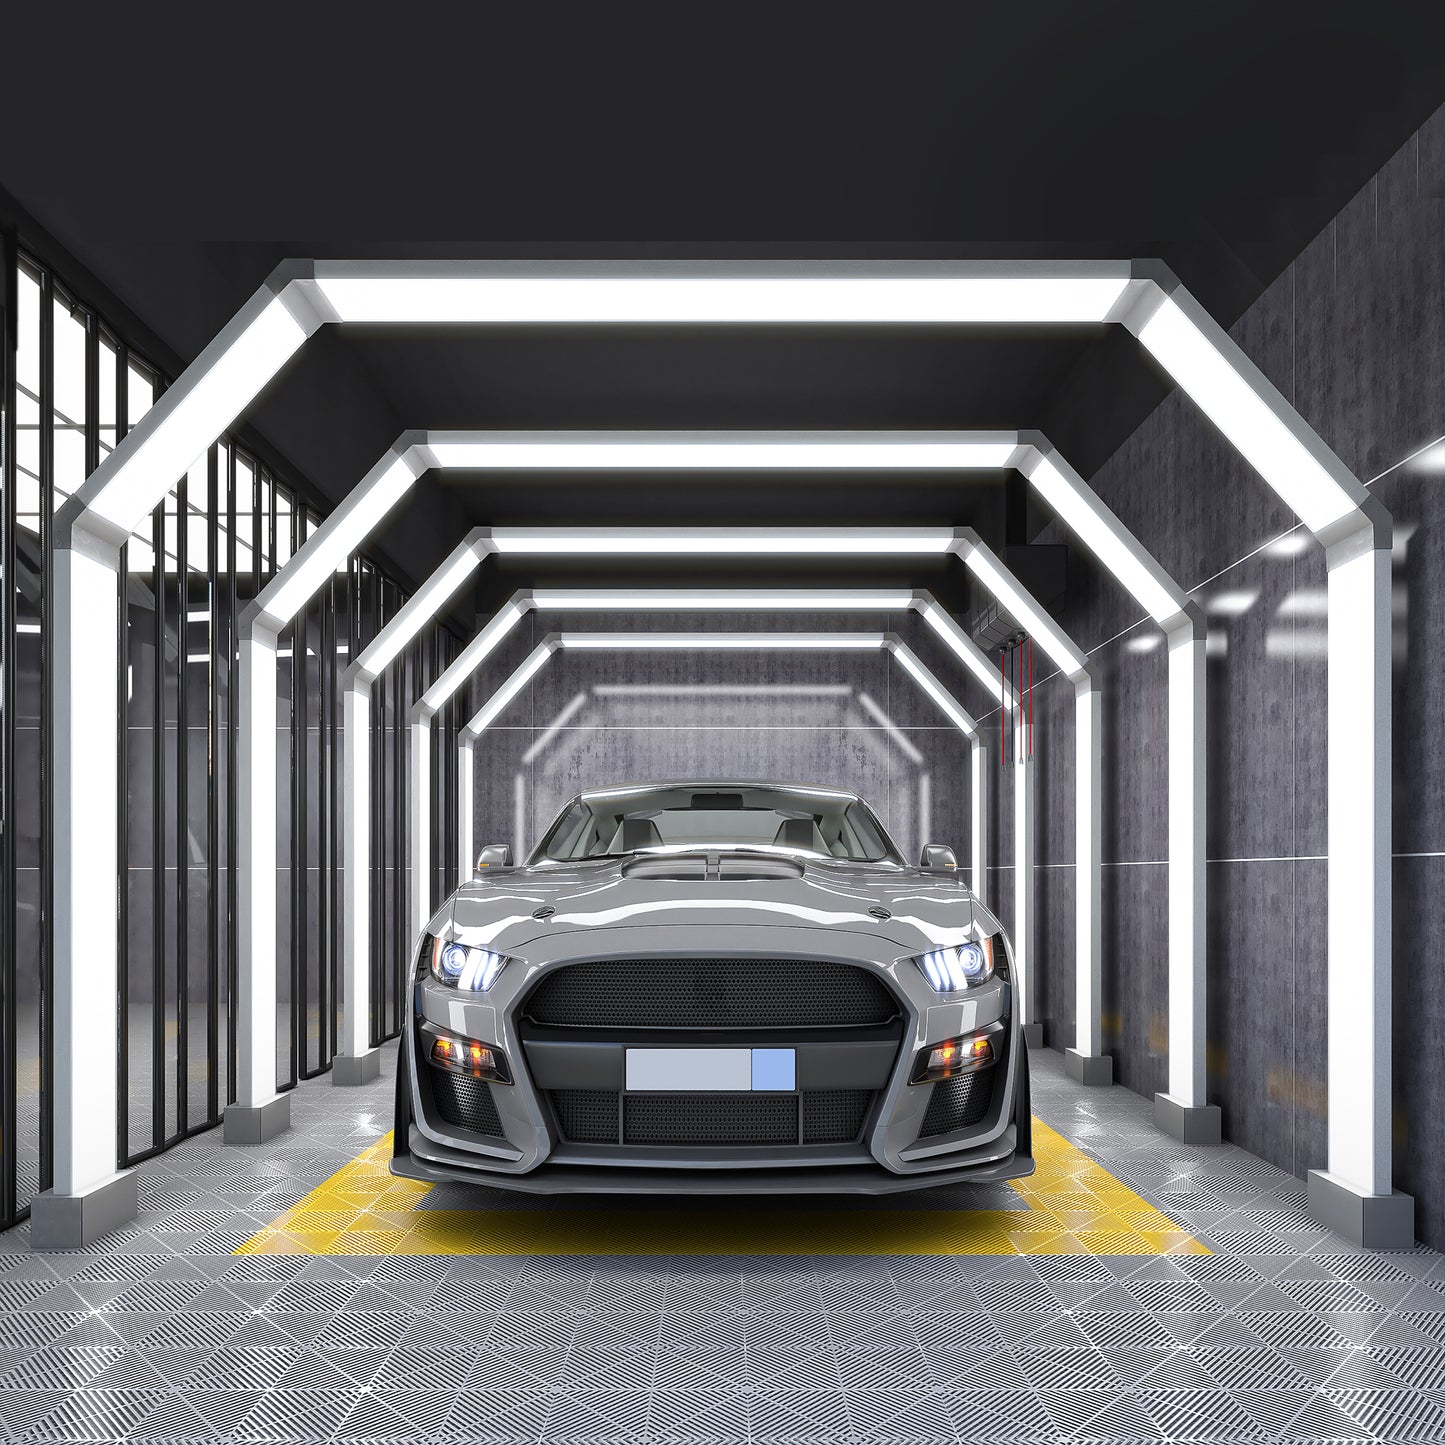 Dynamic lighting effect created by the Portaleon SGE1006 Hexagon LED in a contemporary garage setting.